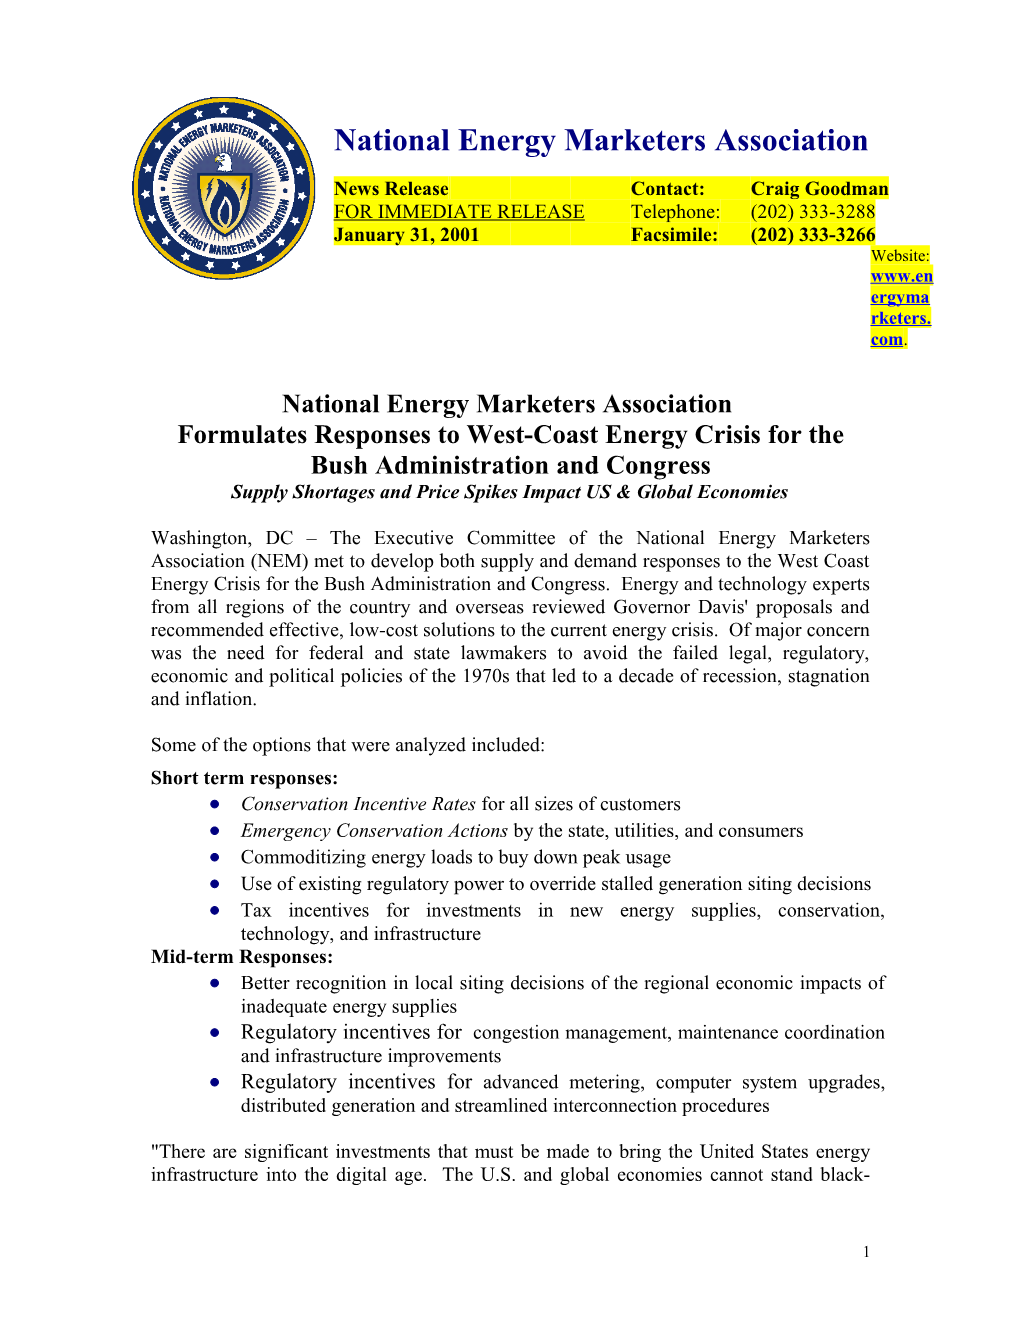 National Energy Marketers Association s1